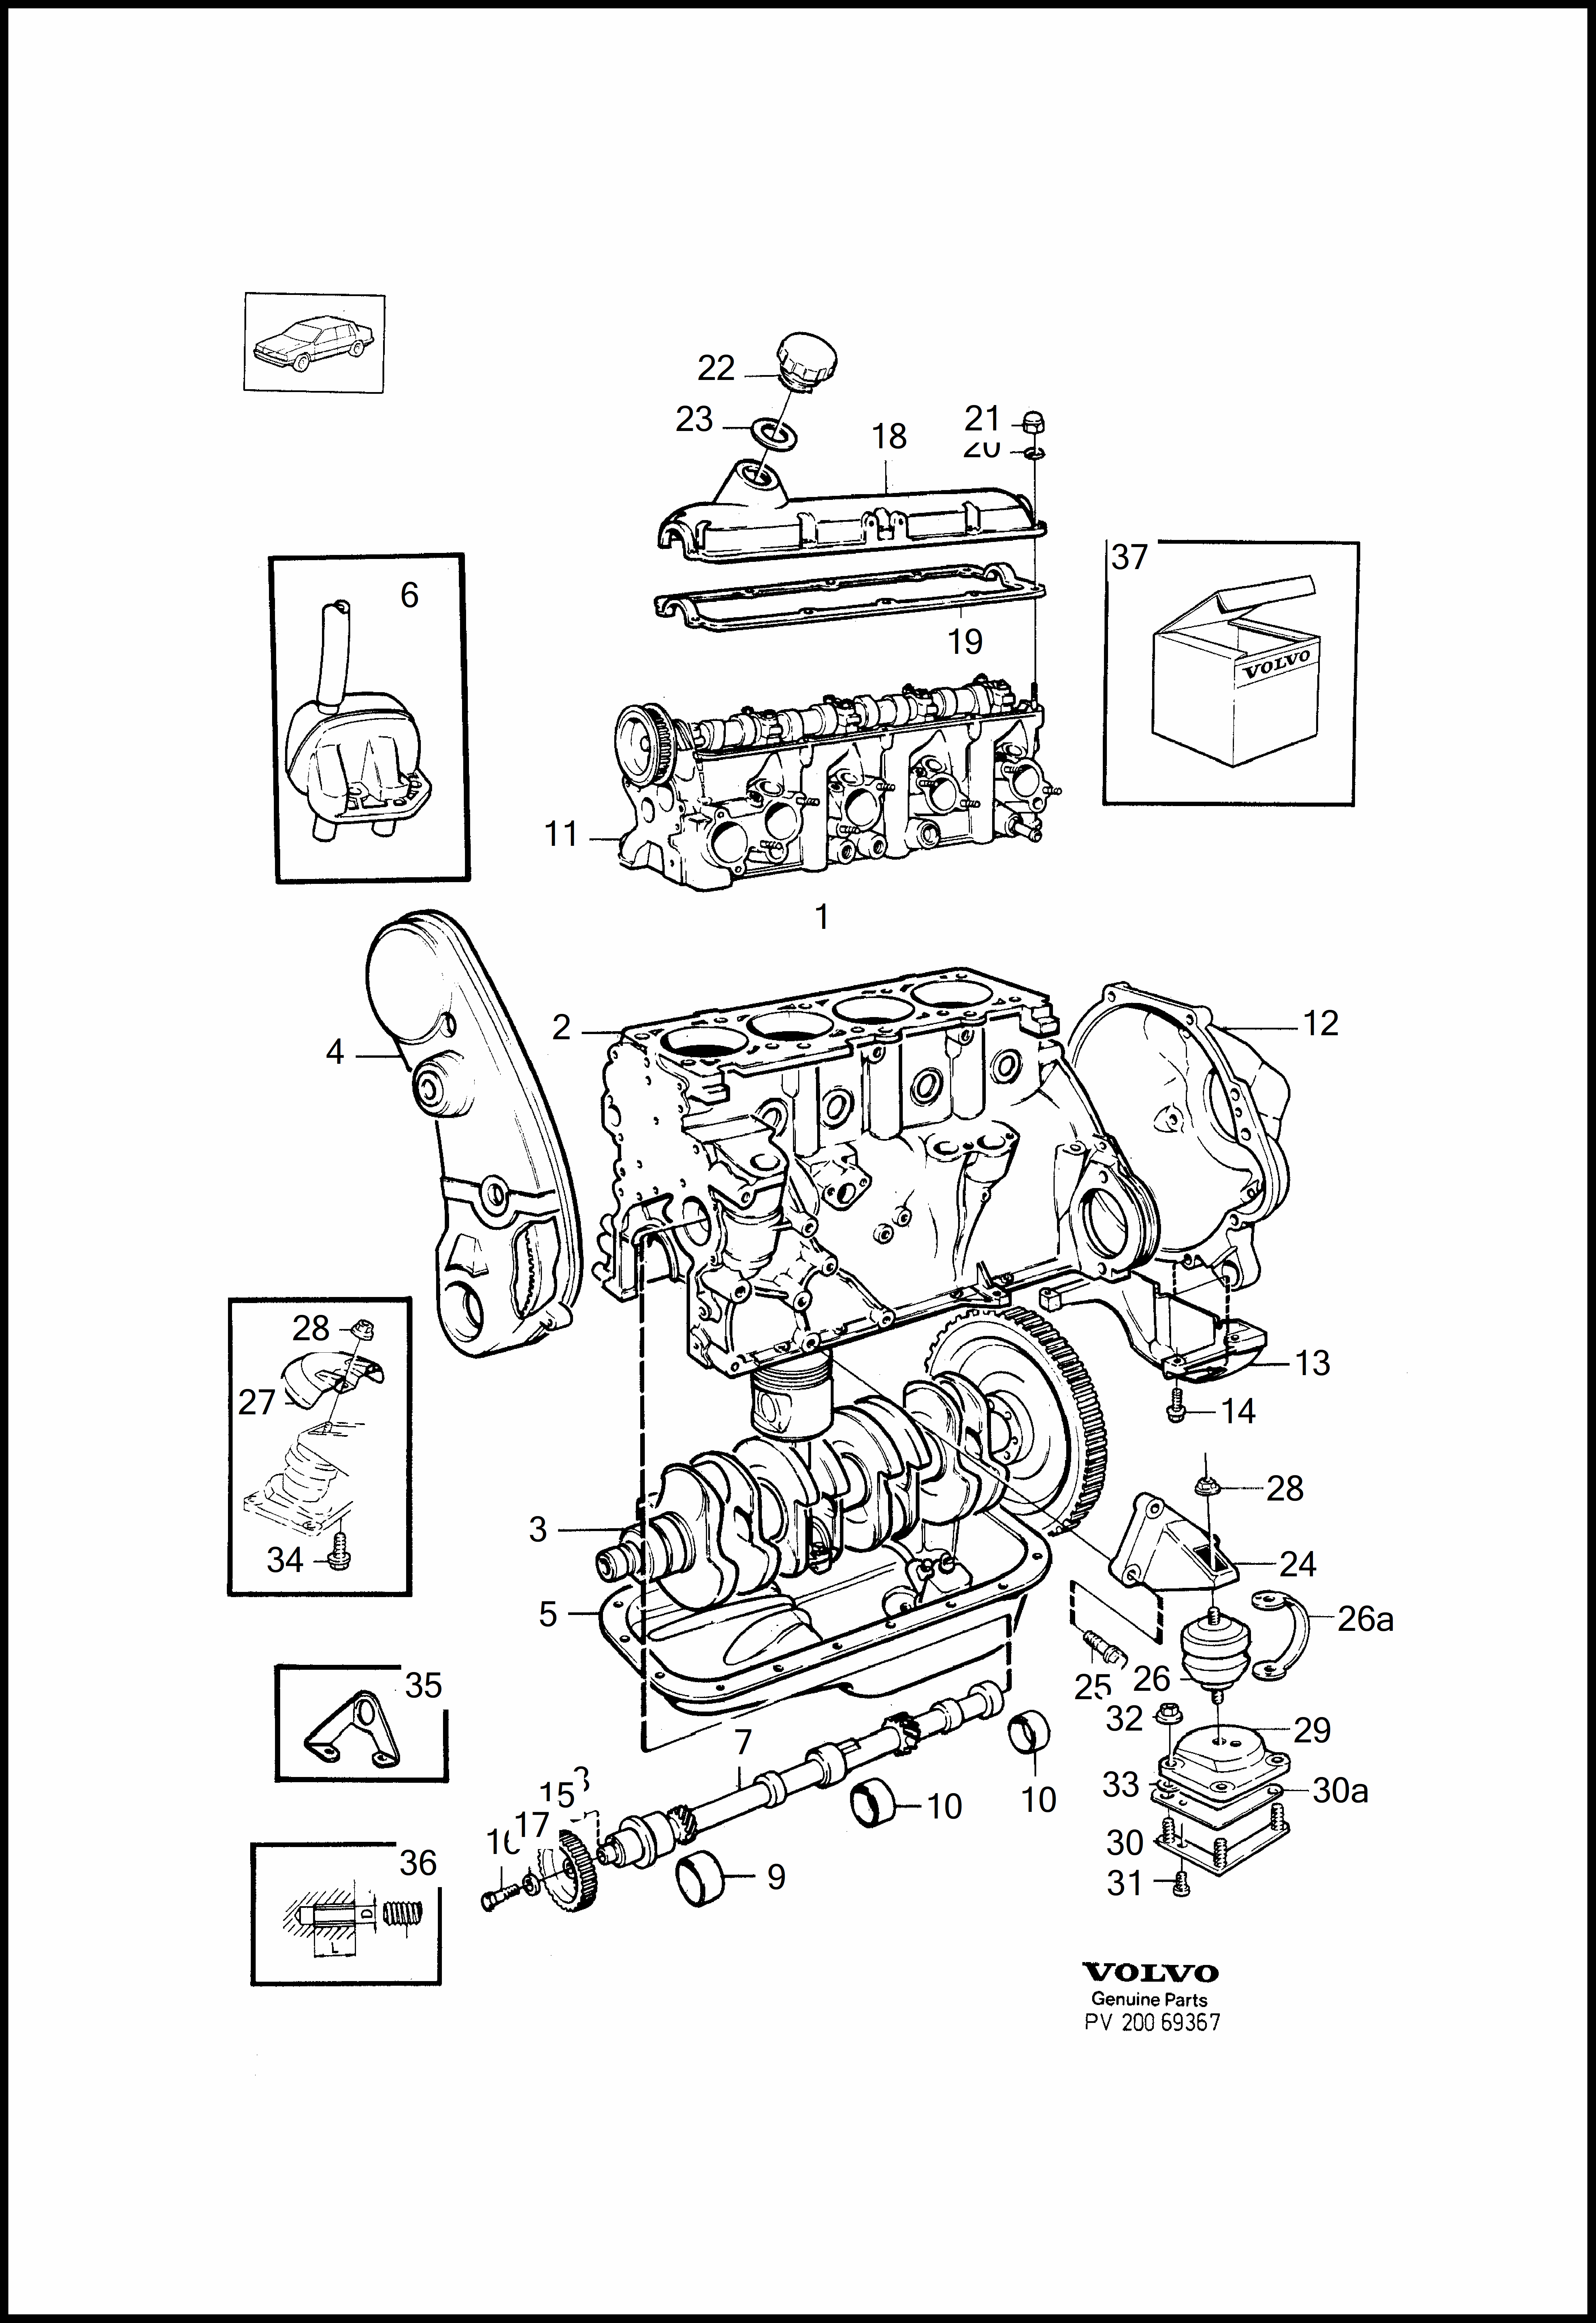 engine with fittings for Volvo 740 740